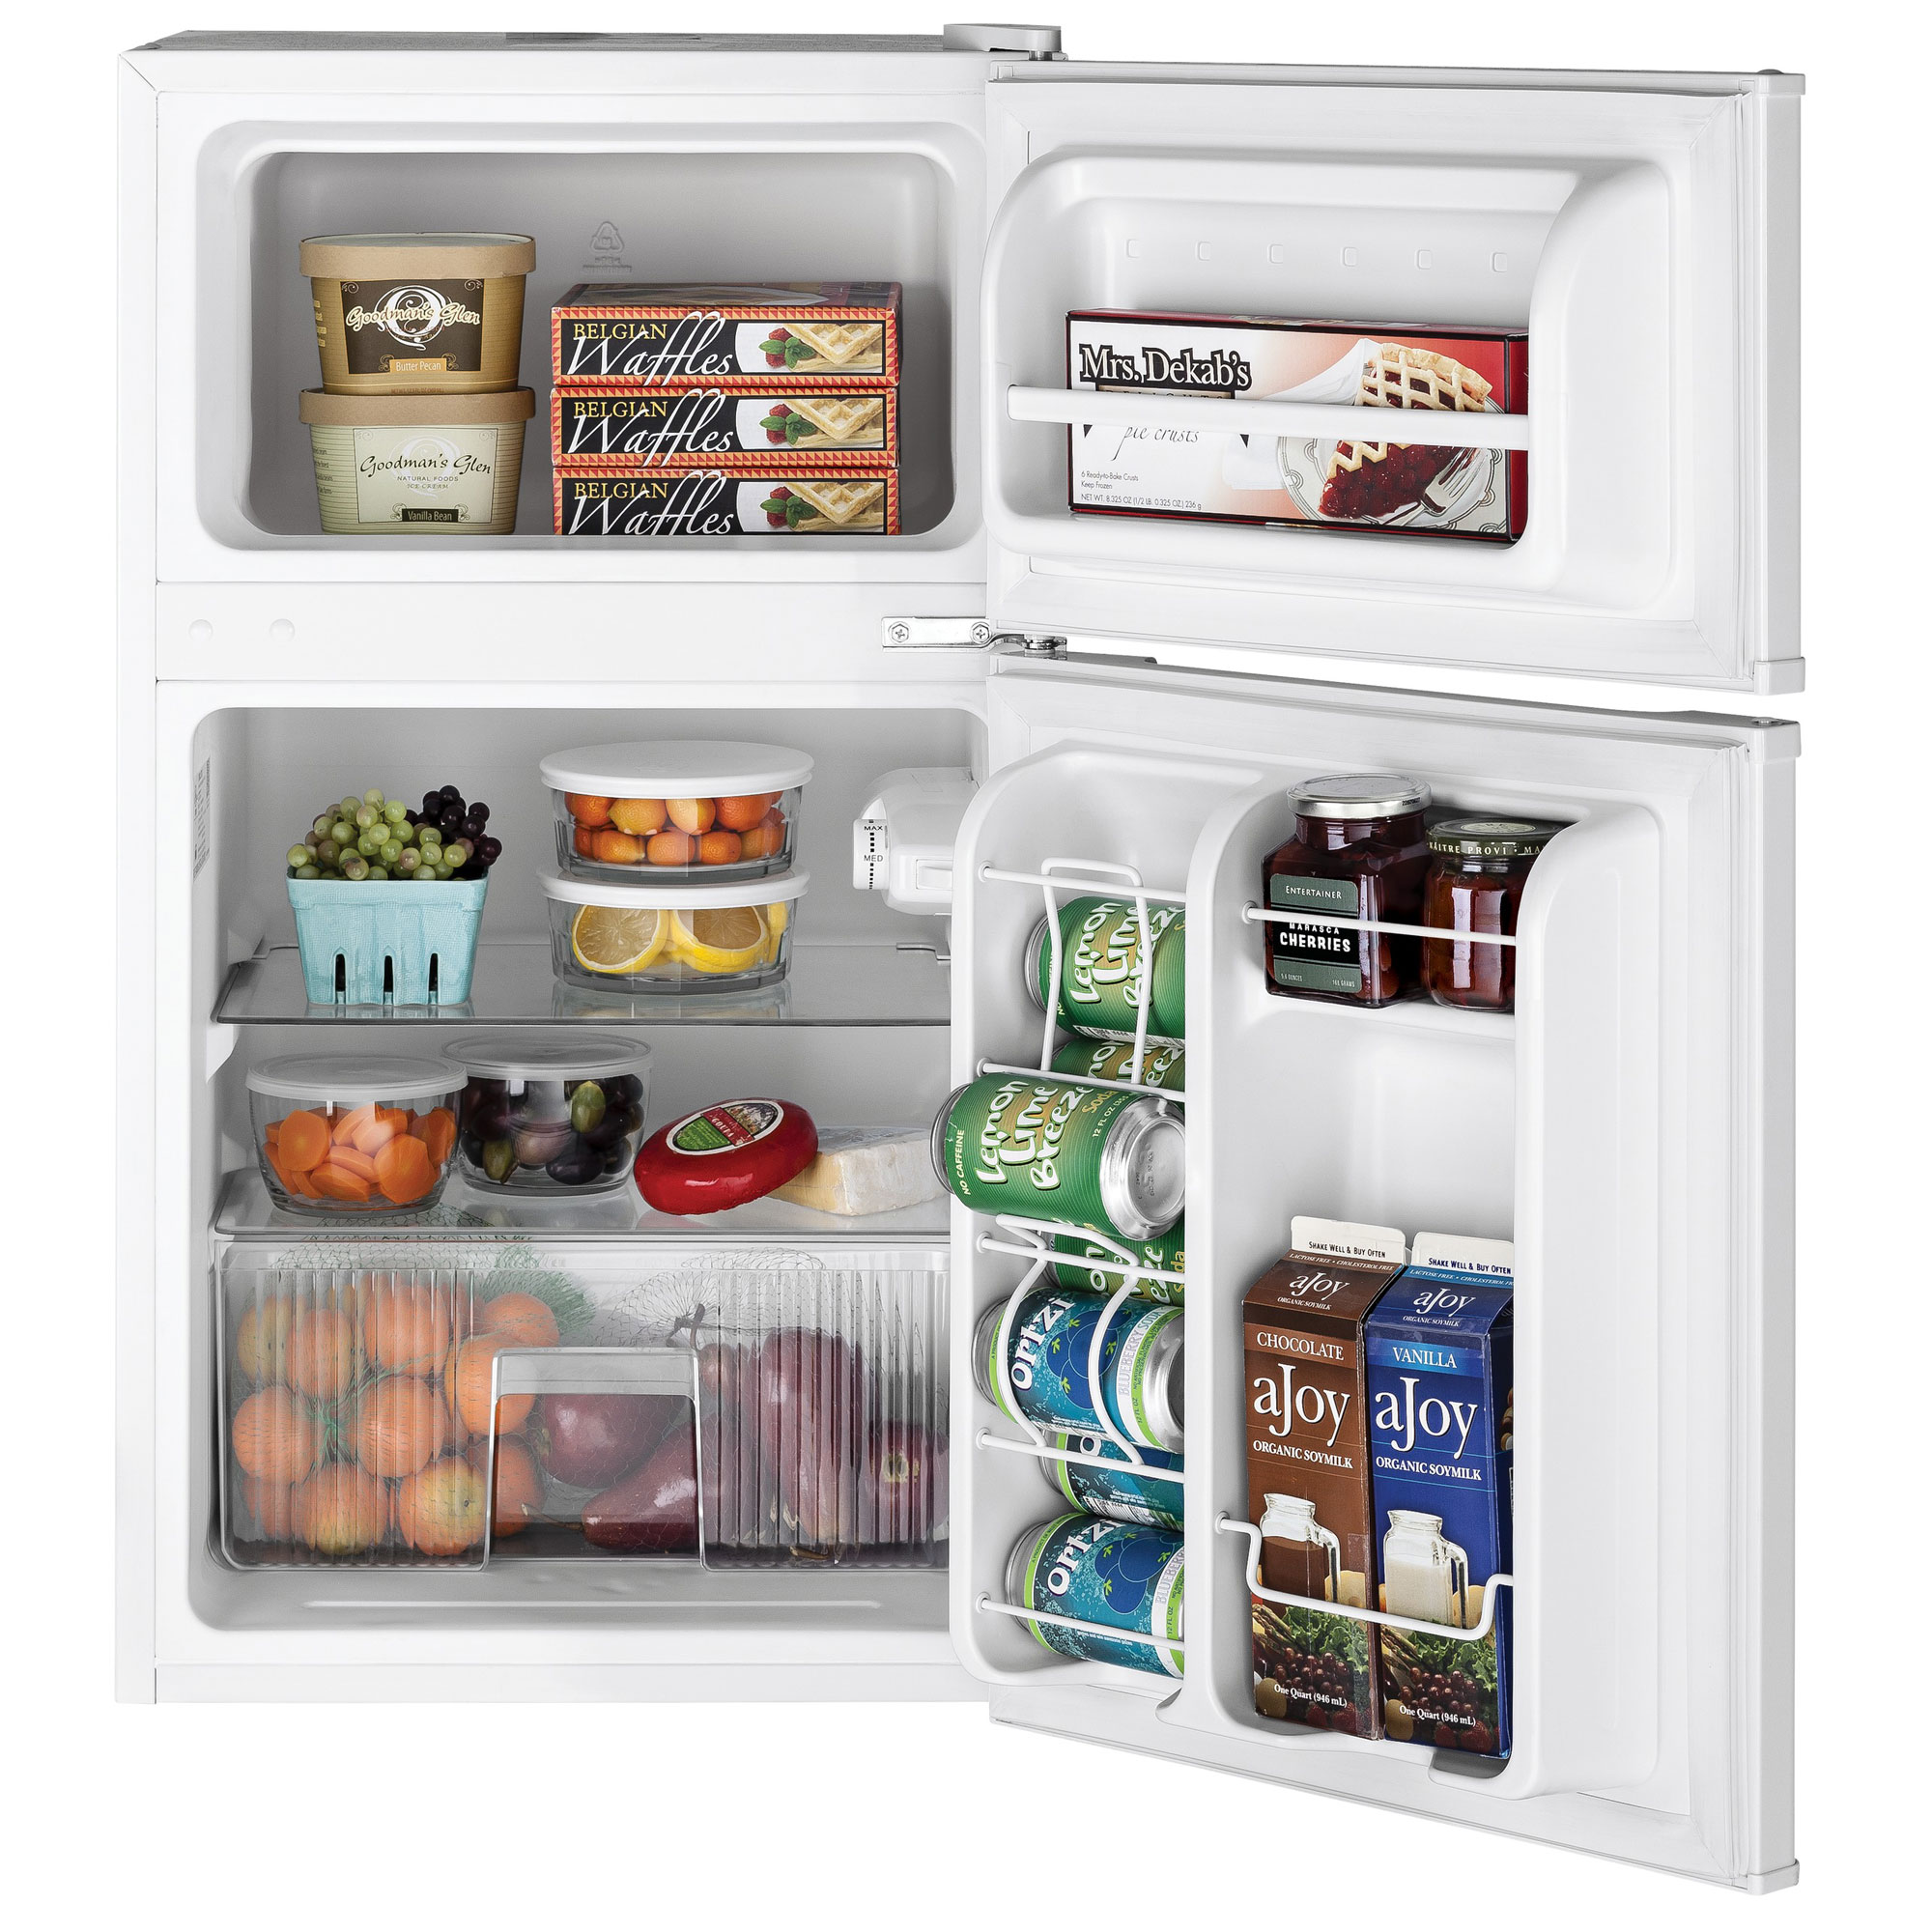 Ge Gde03gk 19" Wide 3.1 Cu. Ft. Energy Star Rated Freestanding Refrigerator - White - image 4 of 5